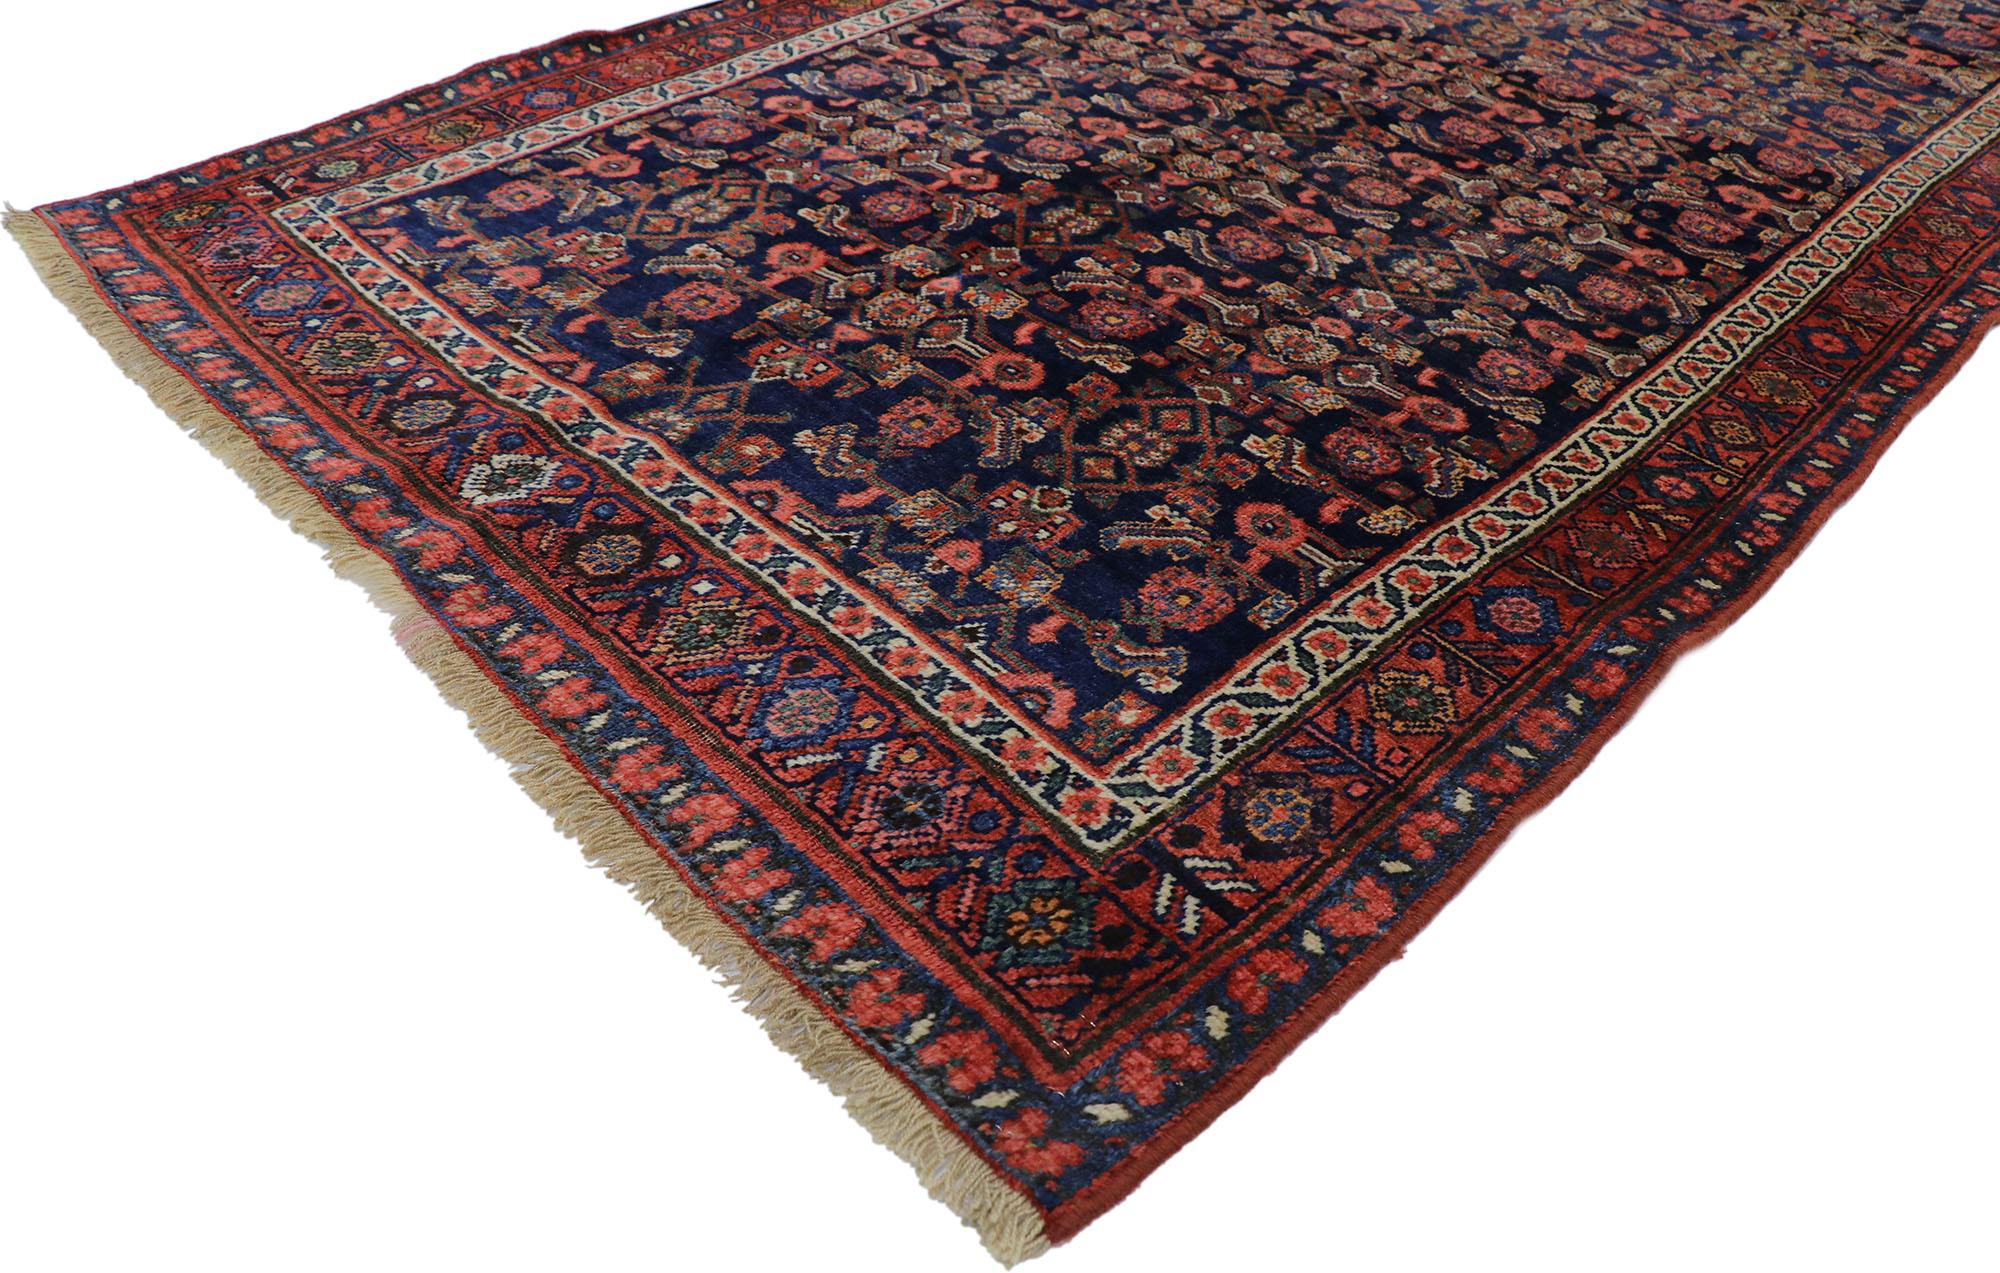 60891 antique Persian Bijar rug with Victorian style 04'02 x 07'03. Rich in color with beguiling beauty, this hand knotted wool distressed antique Persian Bijar rug beautifully embodies a Victorian style. The navy blue field is covered in an